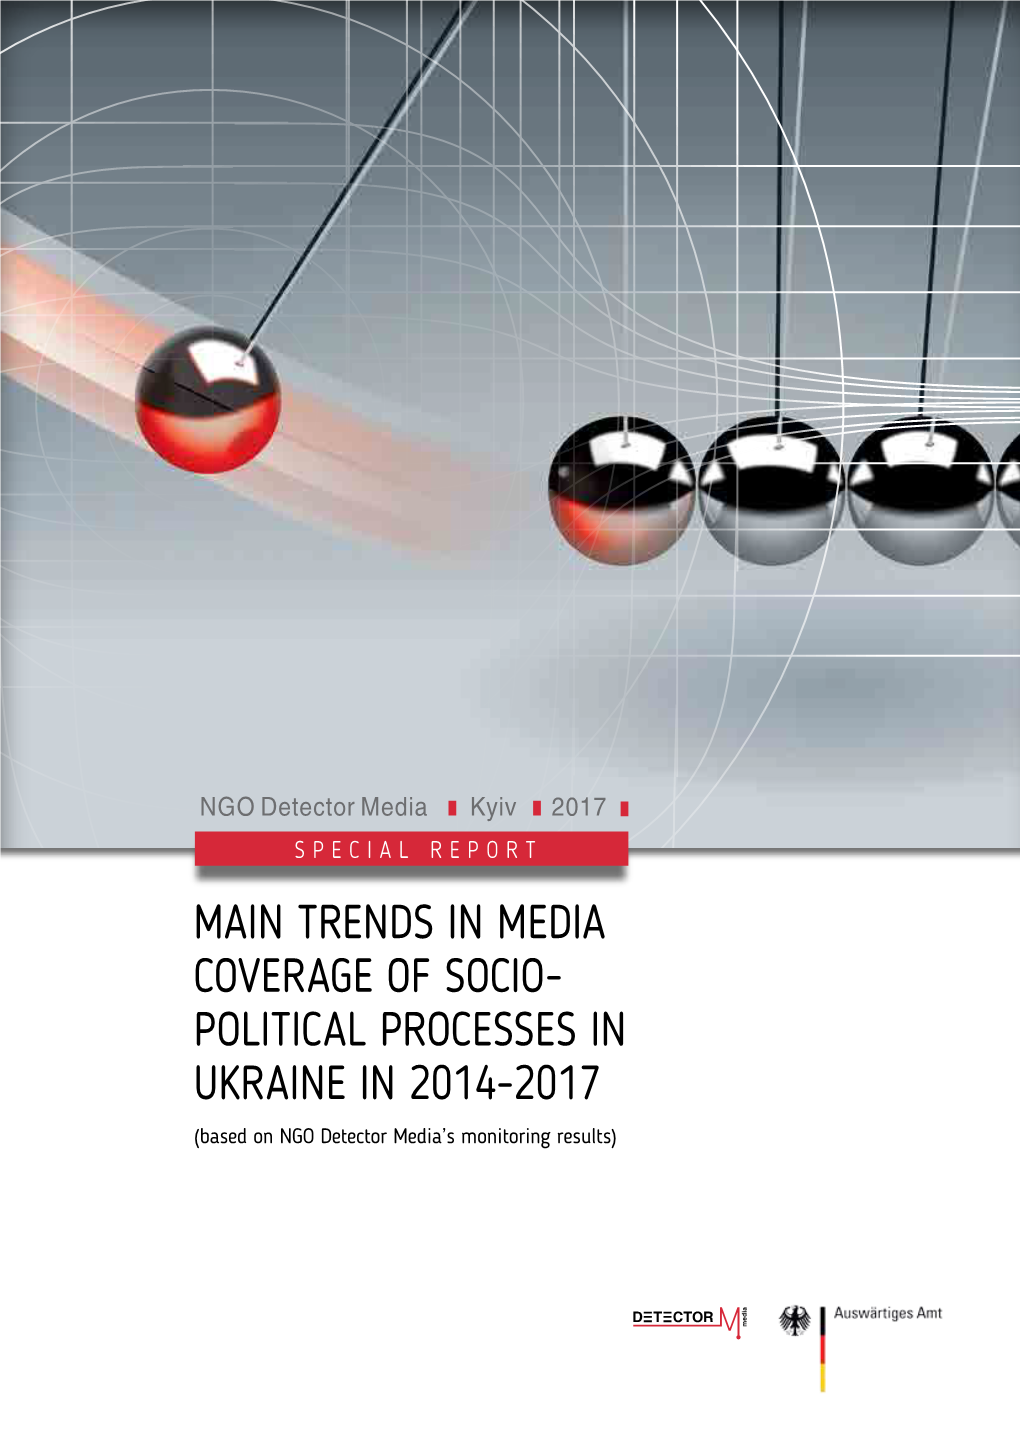 MAIN TRENDS in MEDIA COVERAGE of SOCIO-POLITICAL PROCESSES in UKRAINE in 2014-2017 (Based on NGO Detector Media’S Monitoring Results)